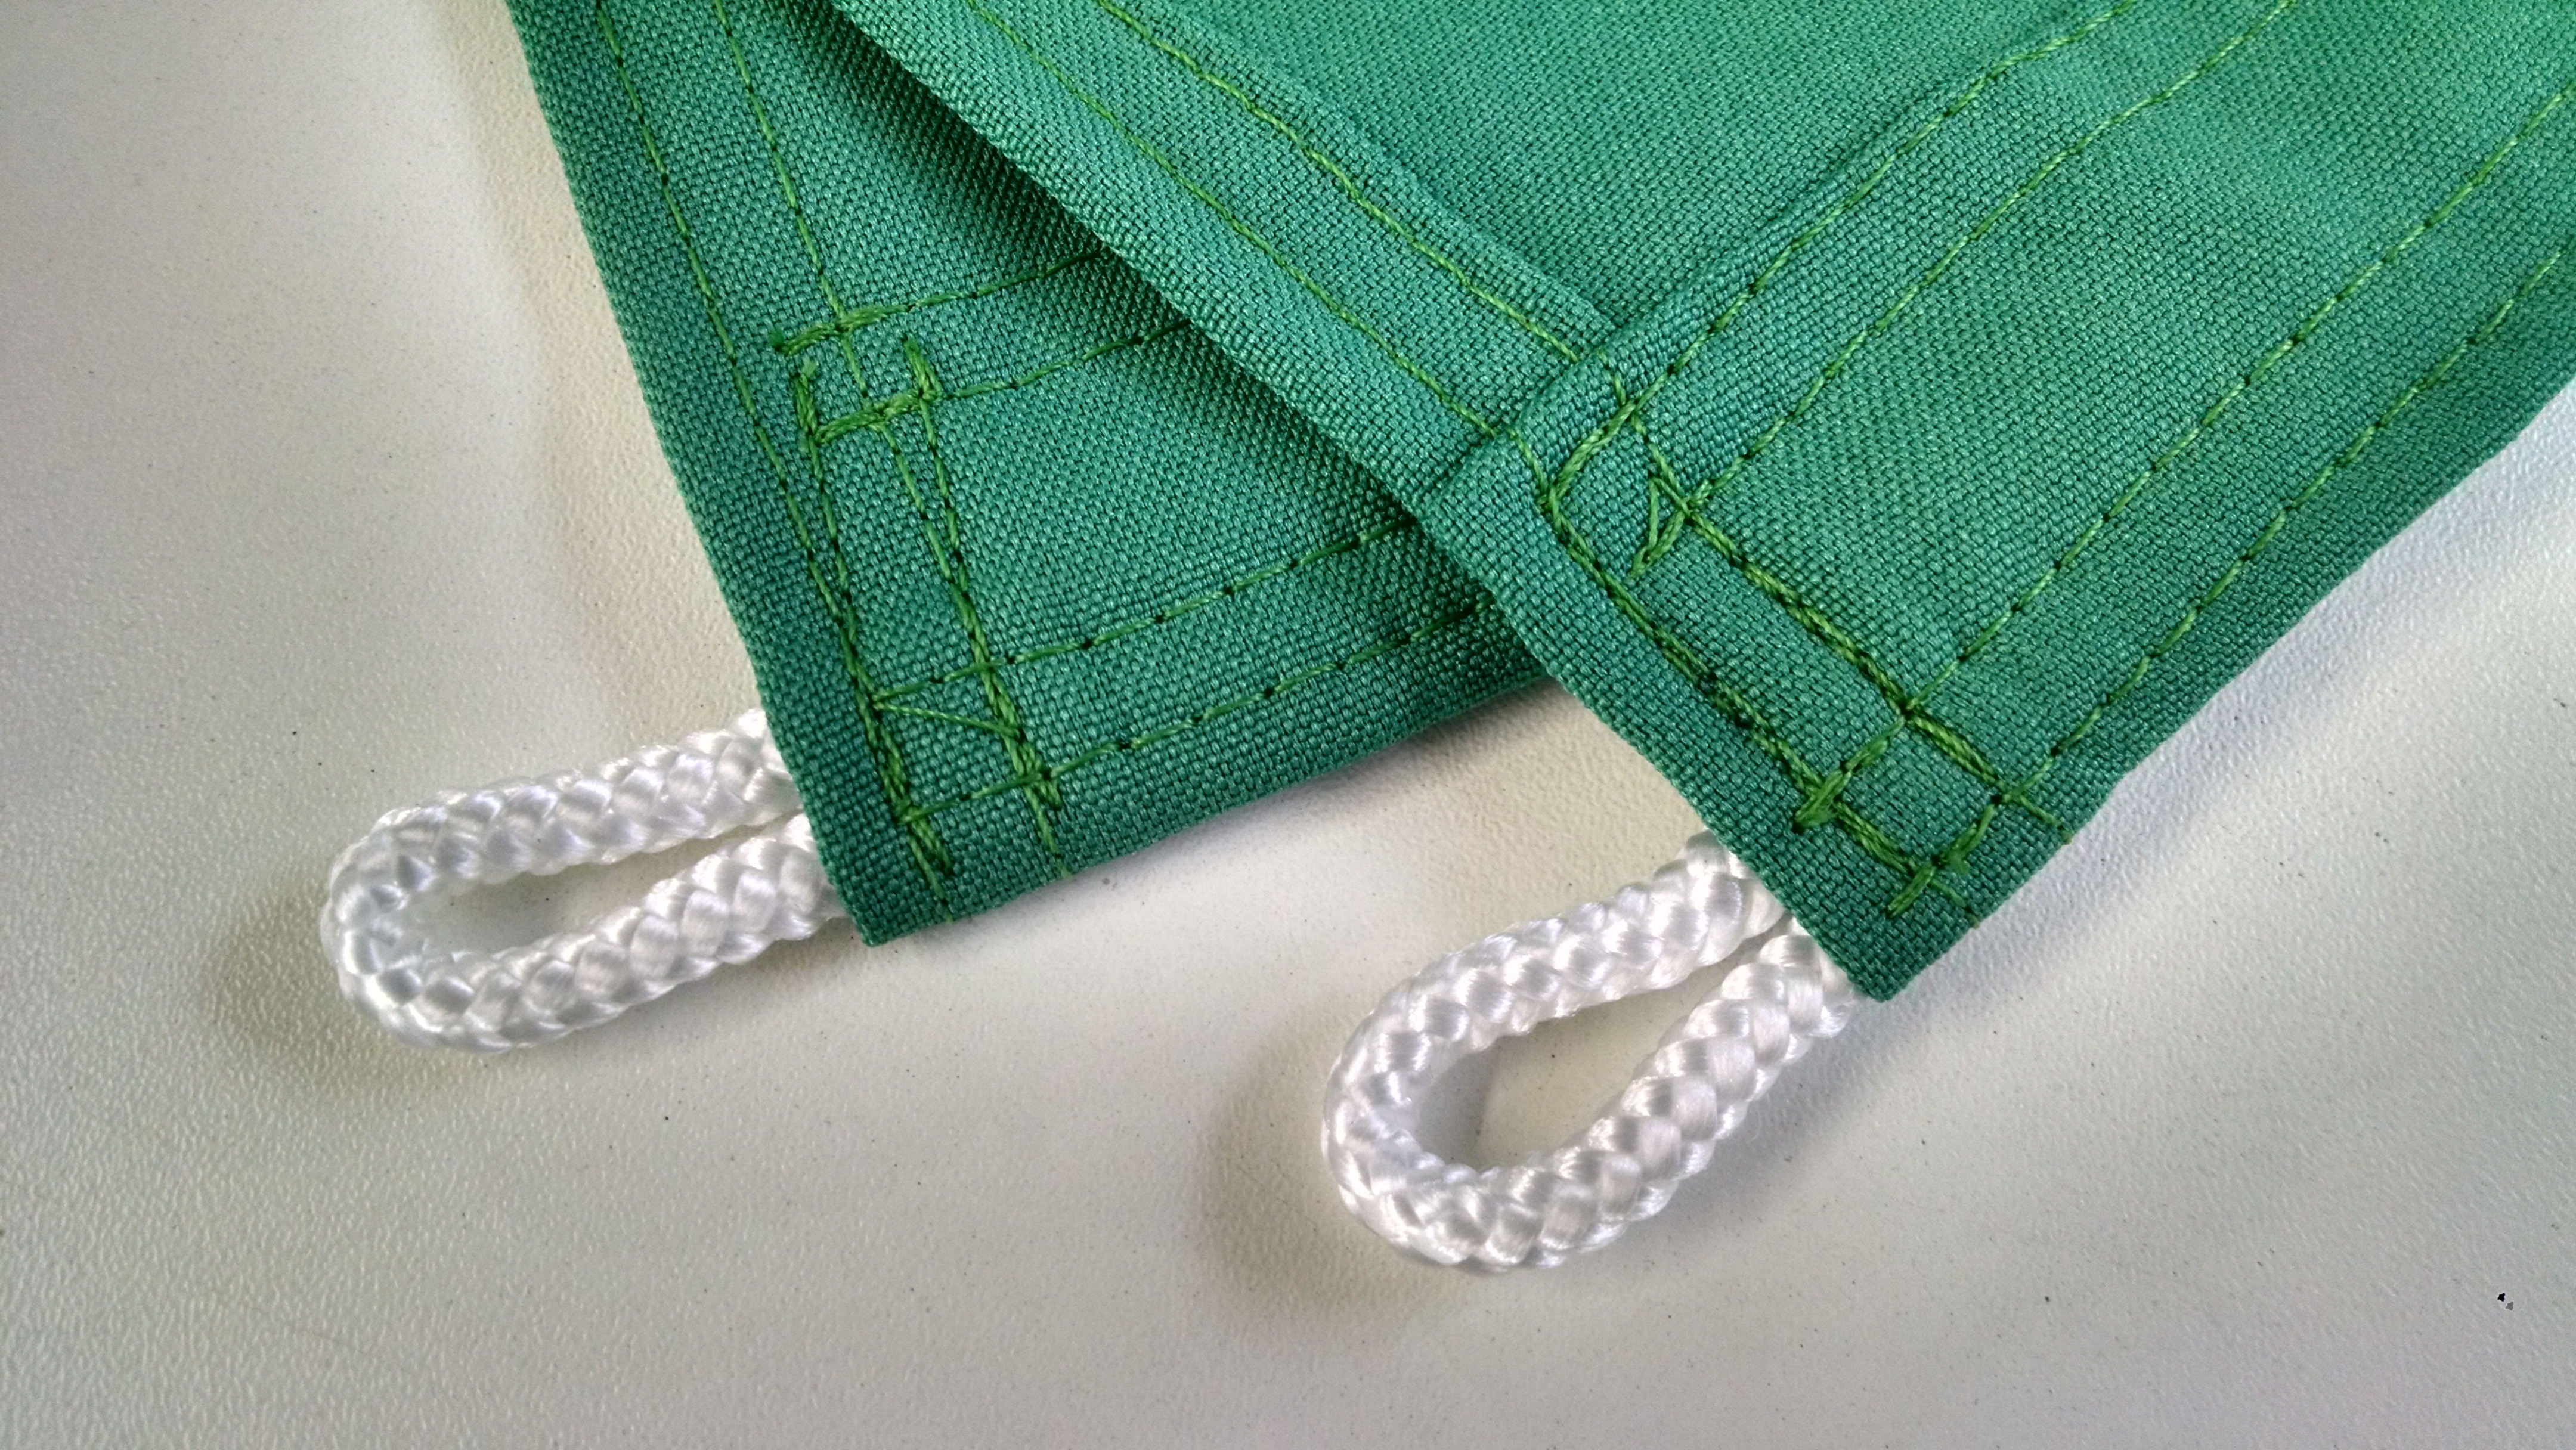 Detail, Stuff, Finish, Flag, Sewing, green color, indoors